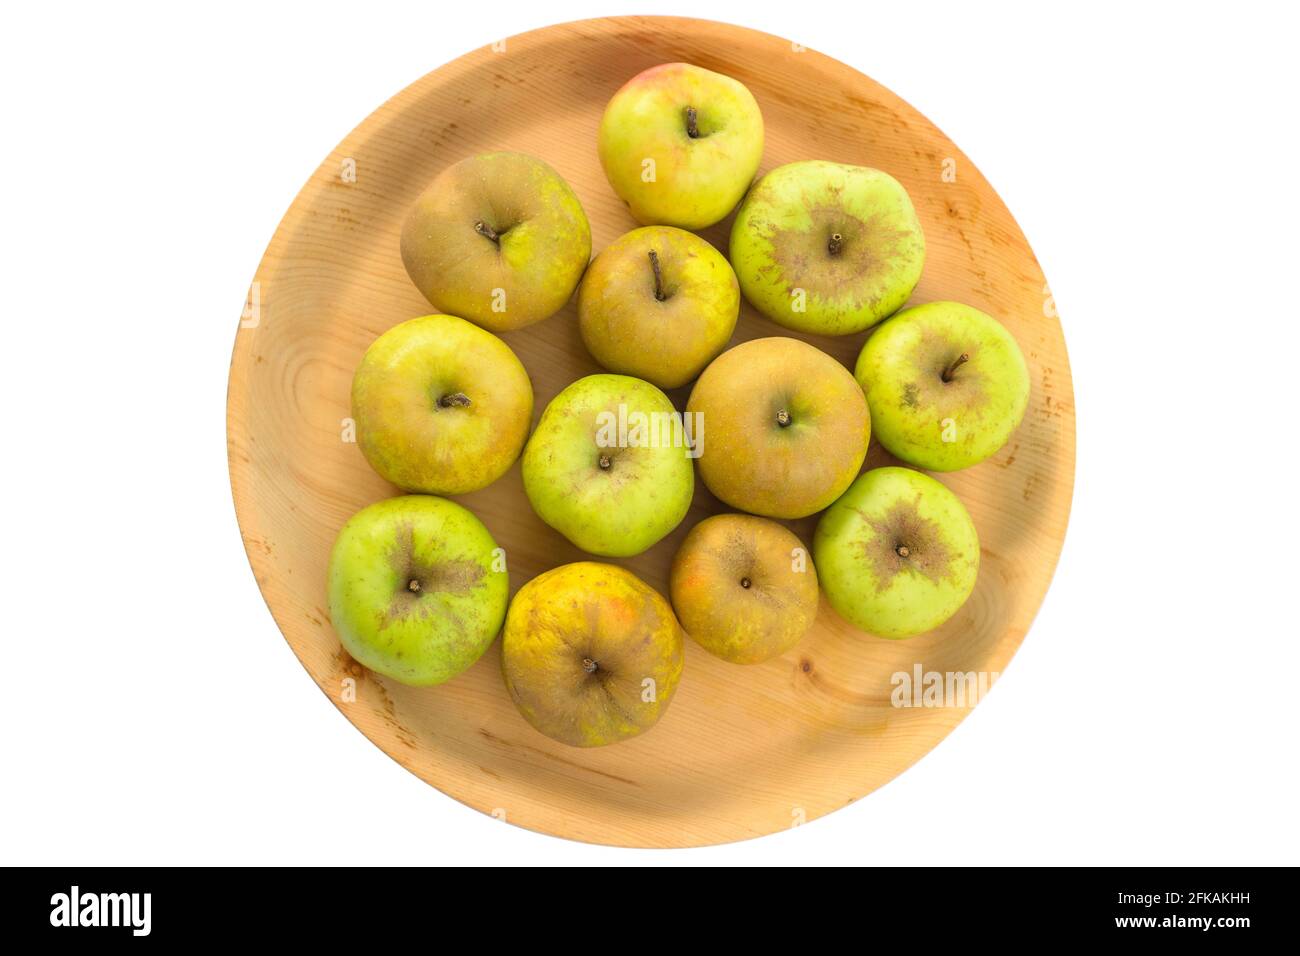 Wooden bowl full of imperfect looking organic apples with unconventionally raised method, no genetically modified organism techniques Stock Photo